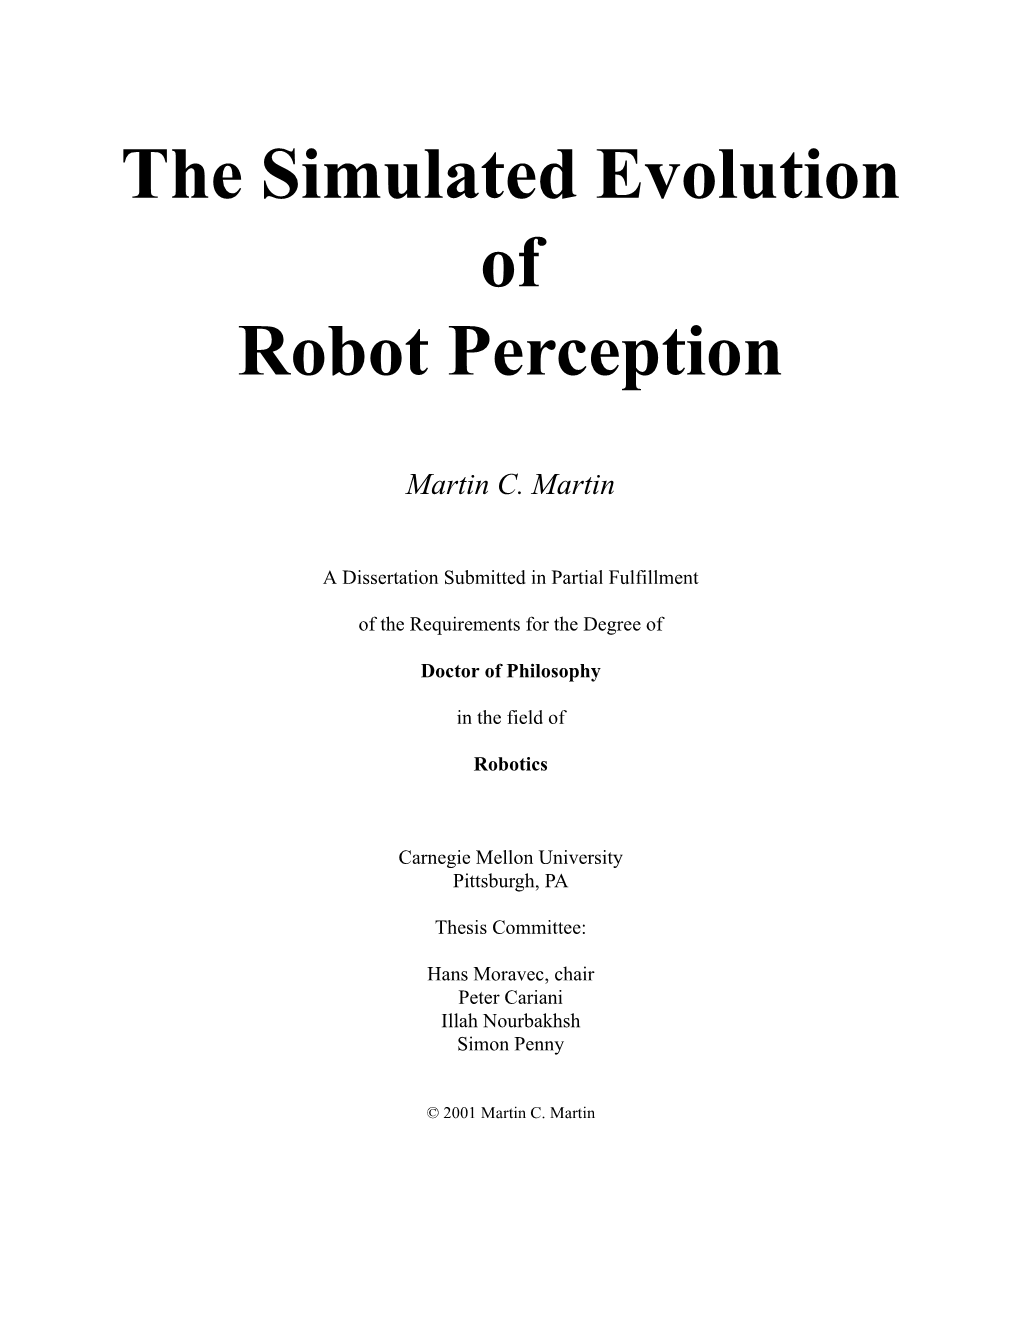 The Simulated Evolution of Robot Perception